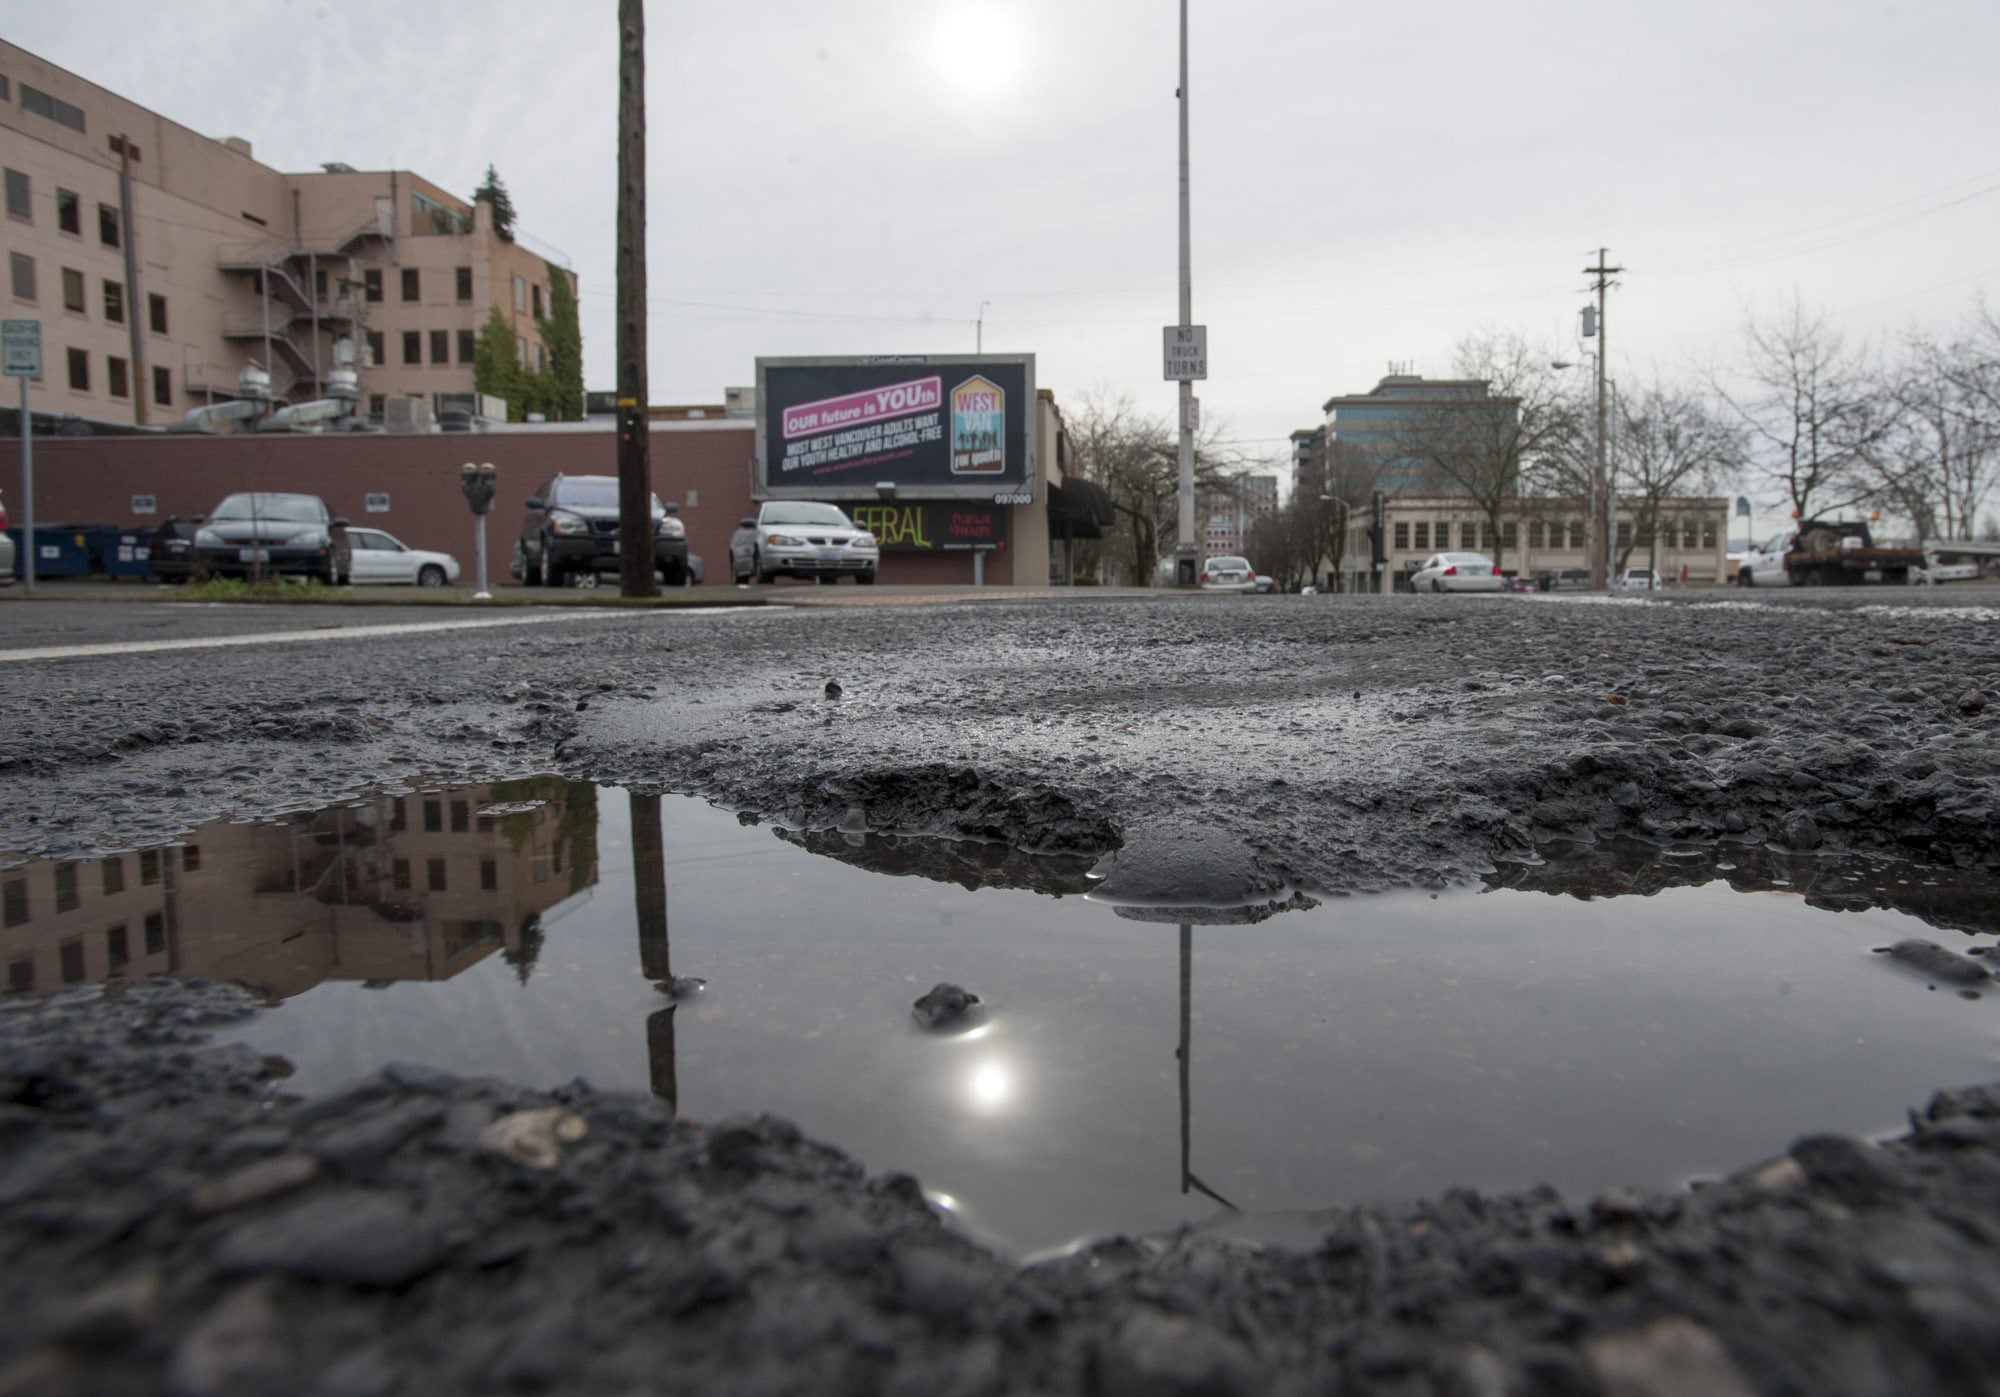 Potholes, such as this one at the intersection of West 12th and Washington streets in downtown Vancouver, are appearing countywide amid winter weather.